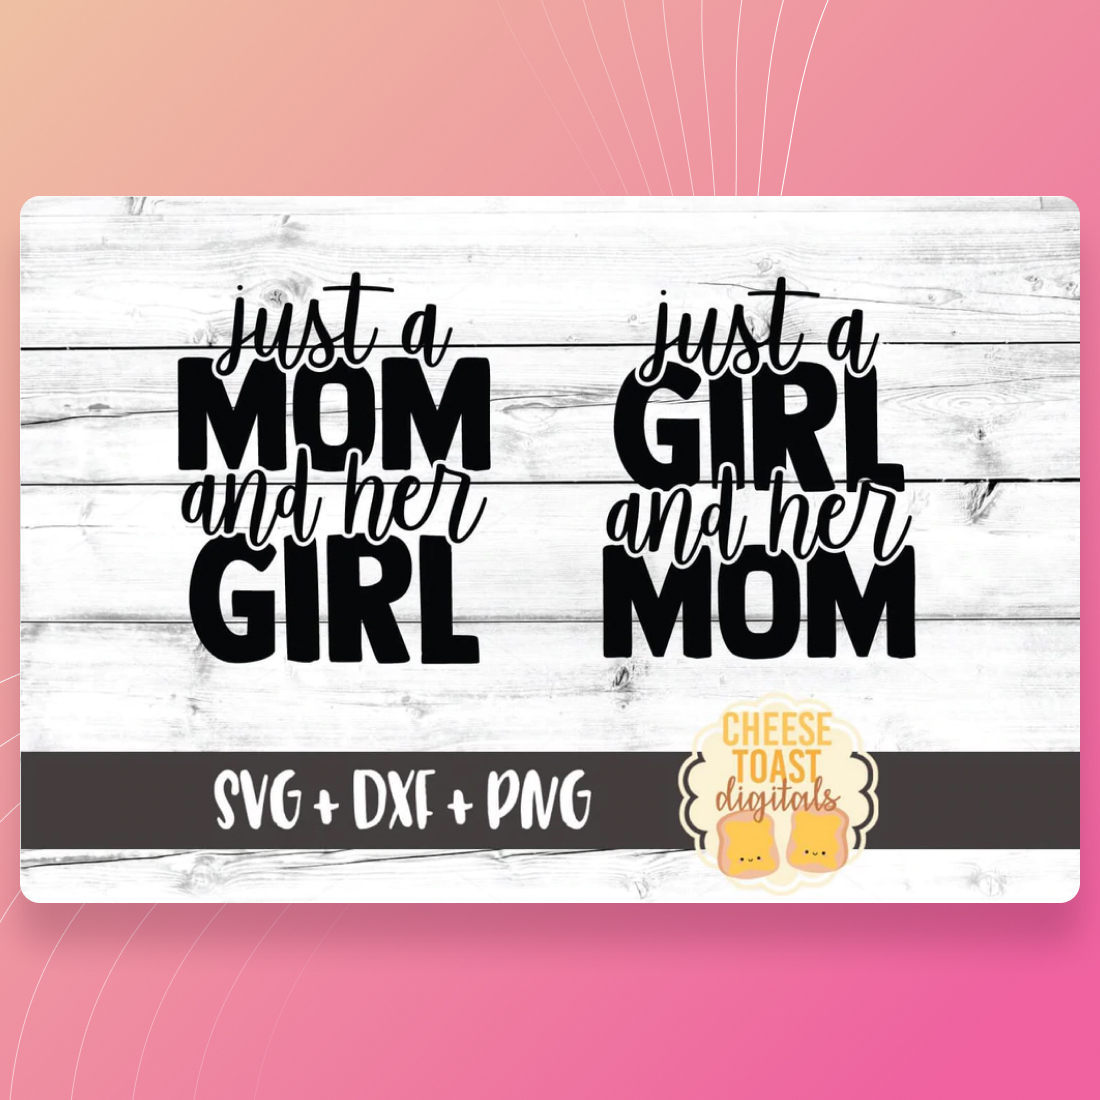 Mommy and Me SVG - Just A Mom and Her Girl cover image.